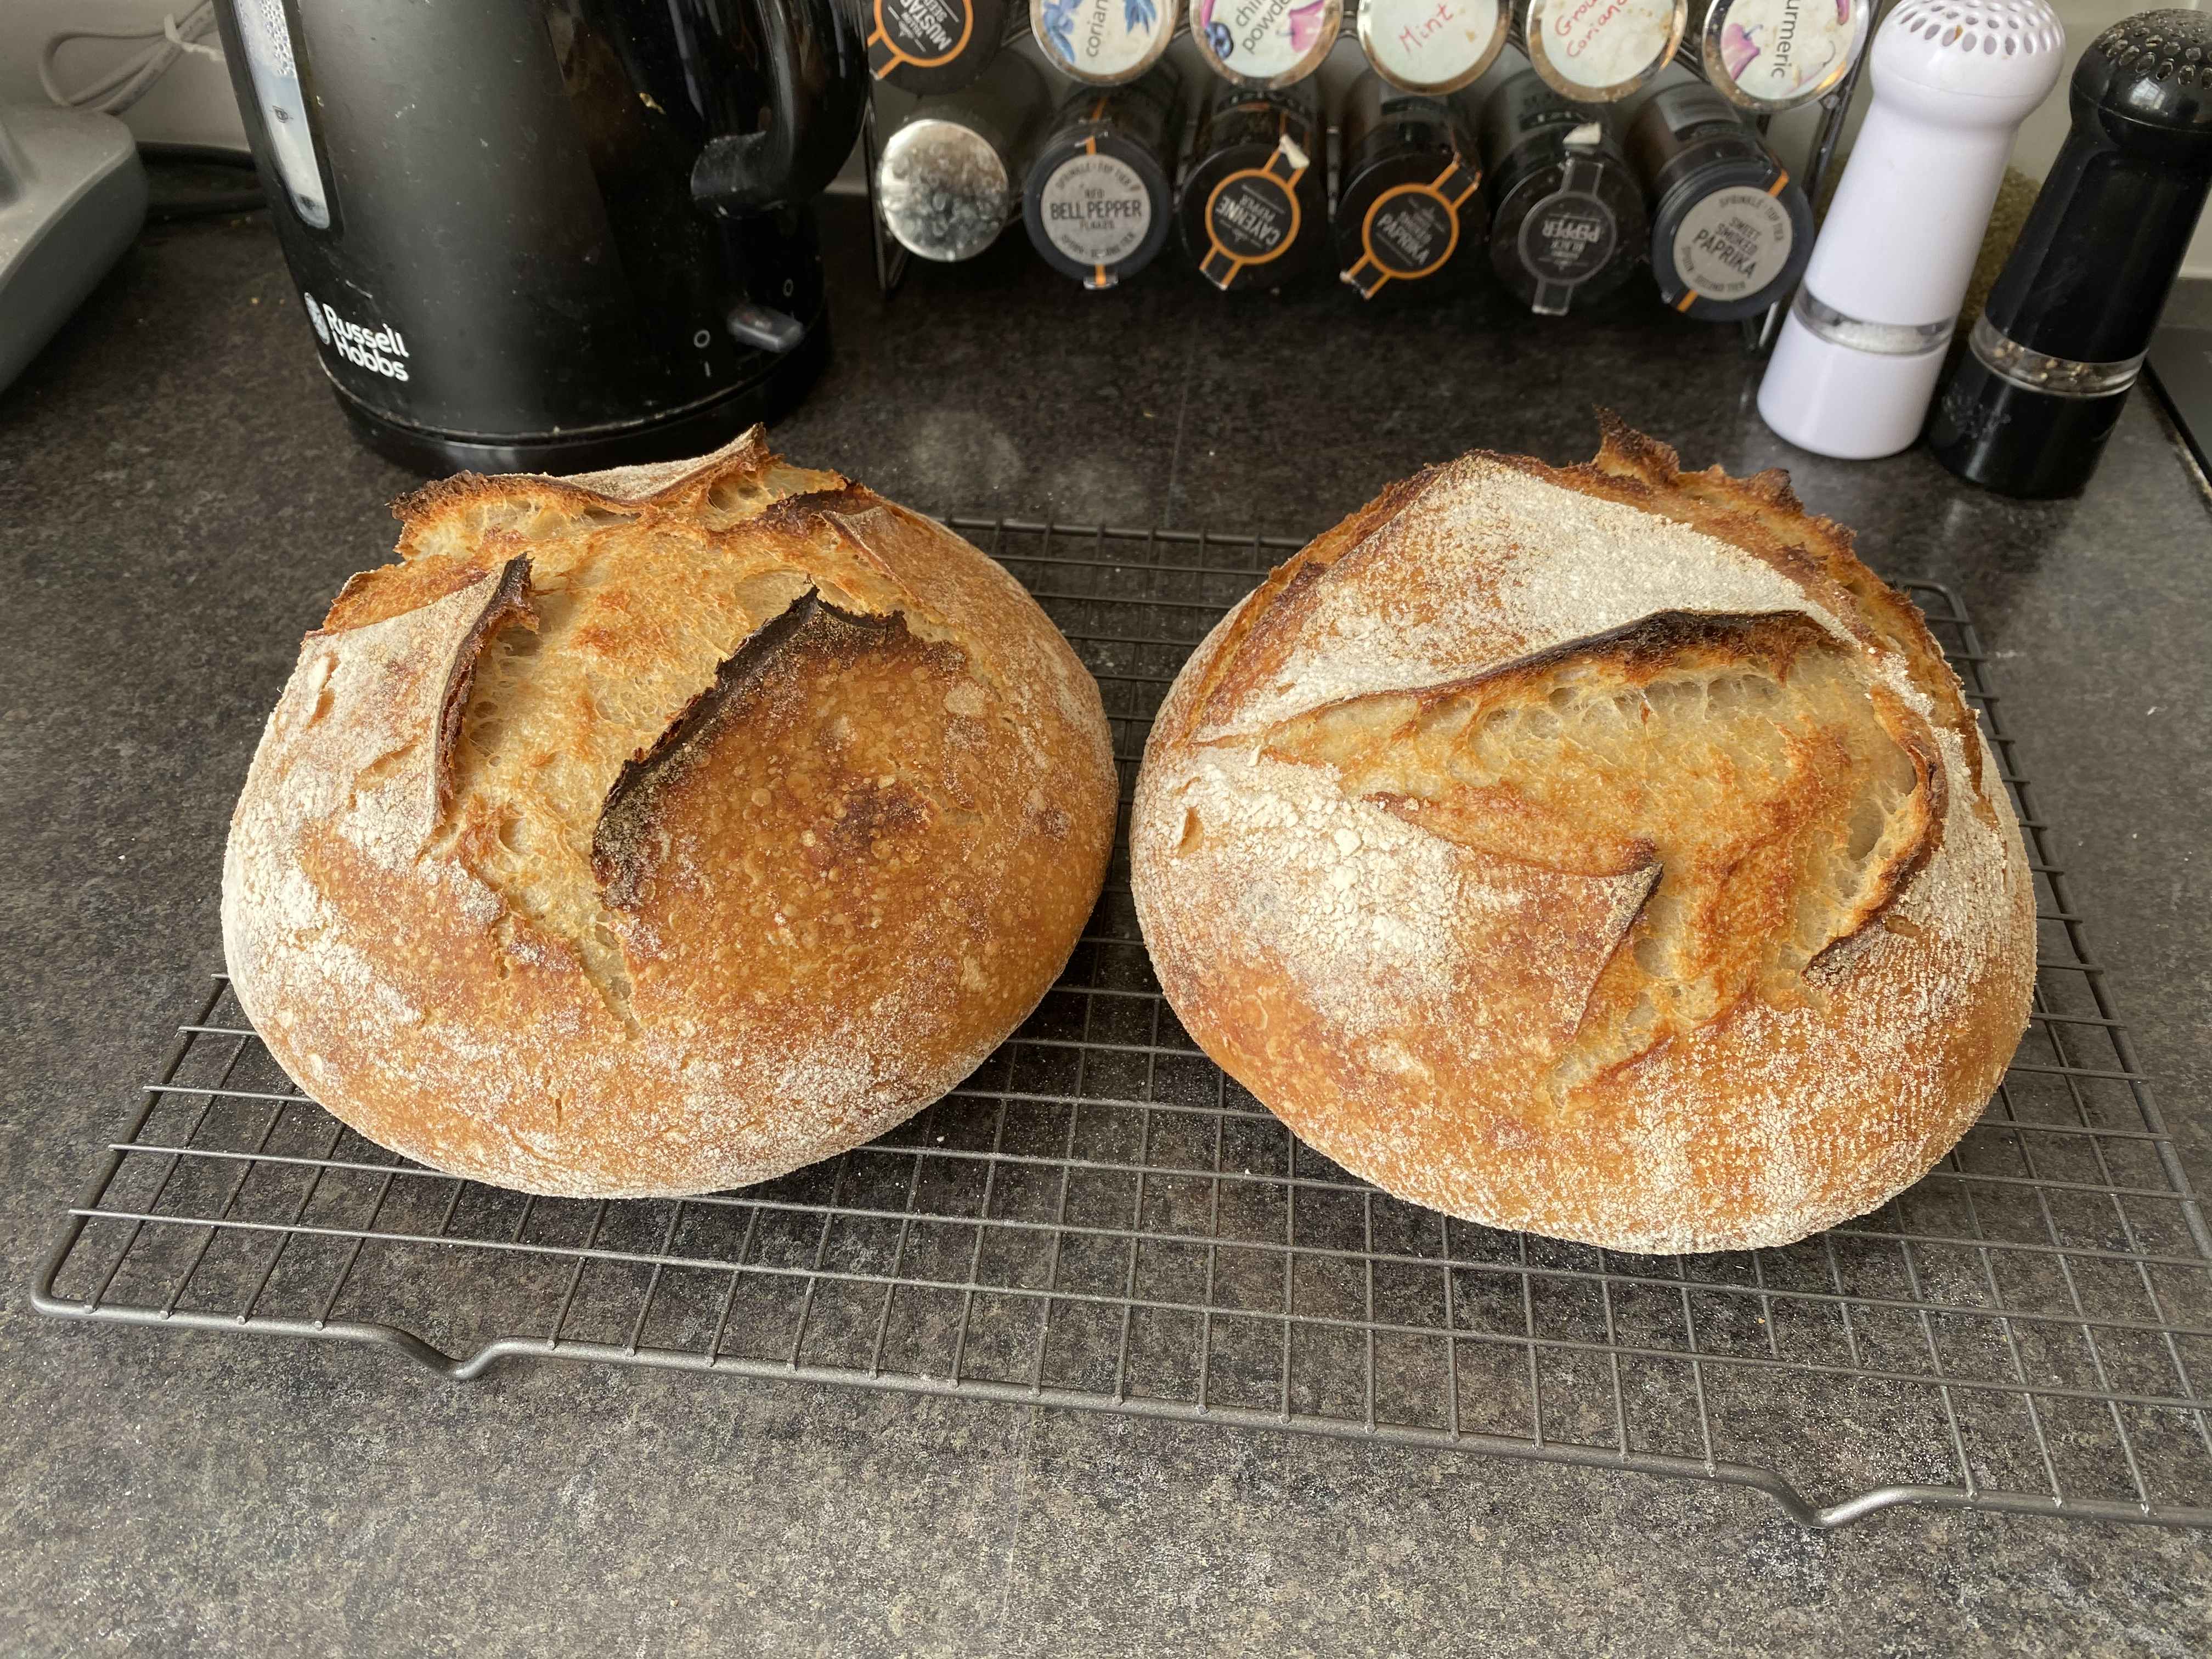 Some of my bread.